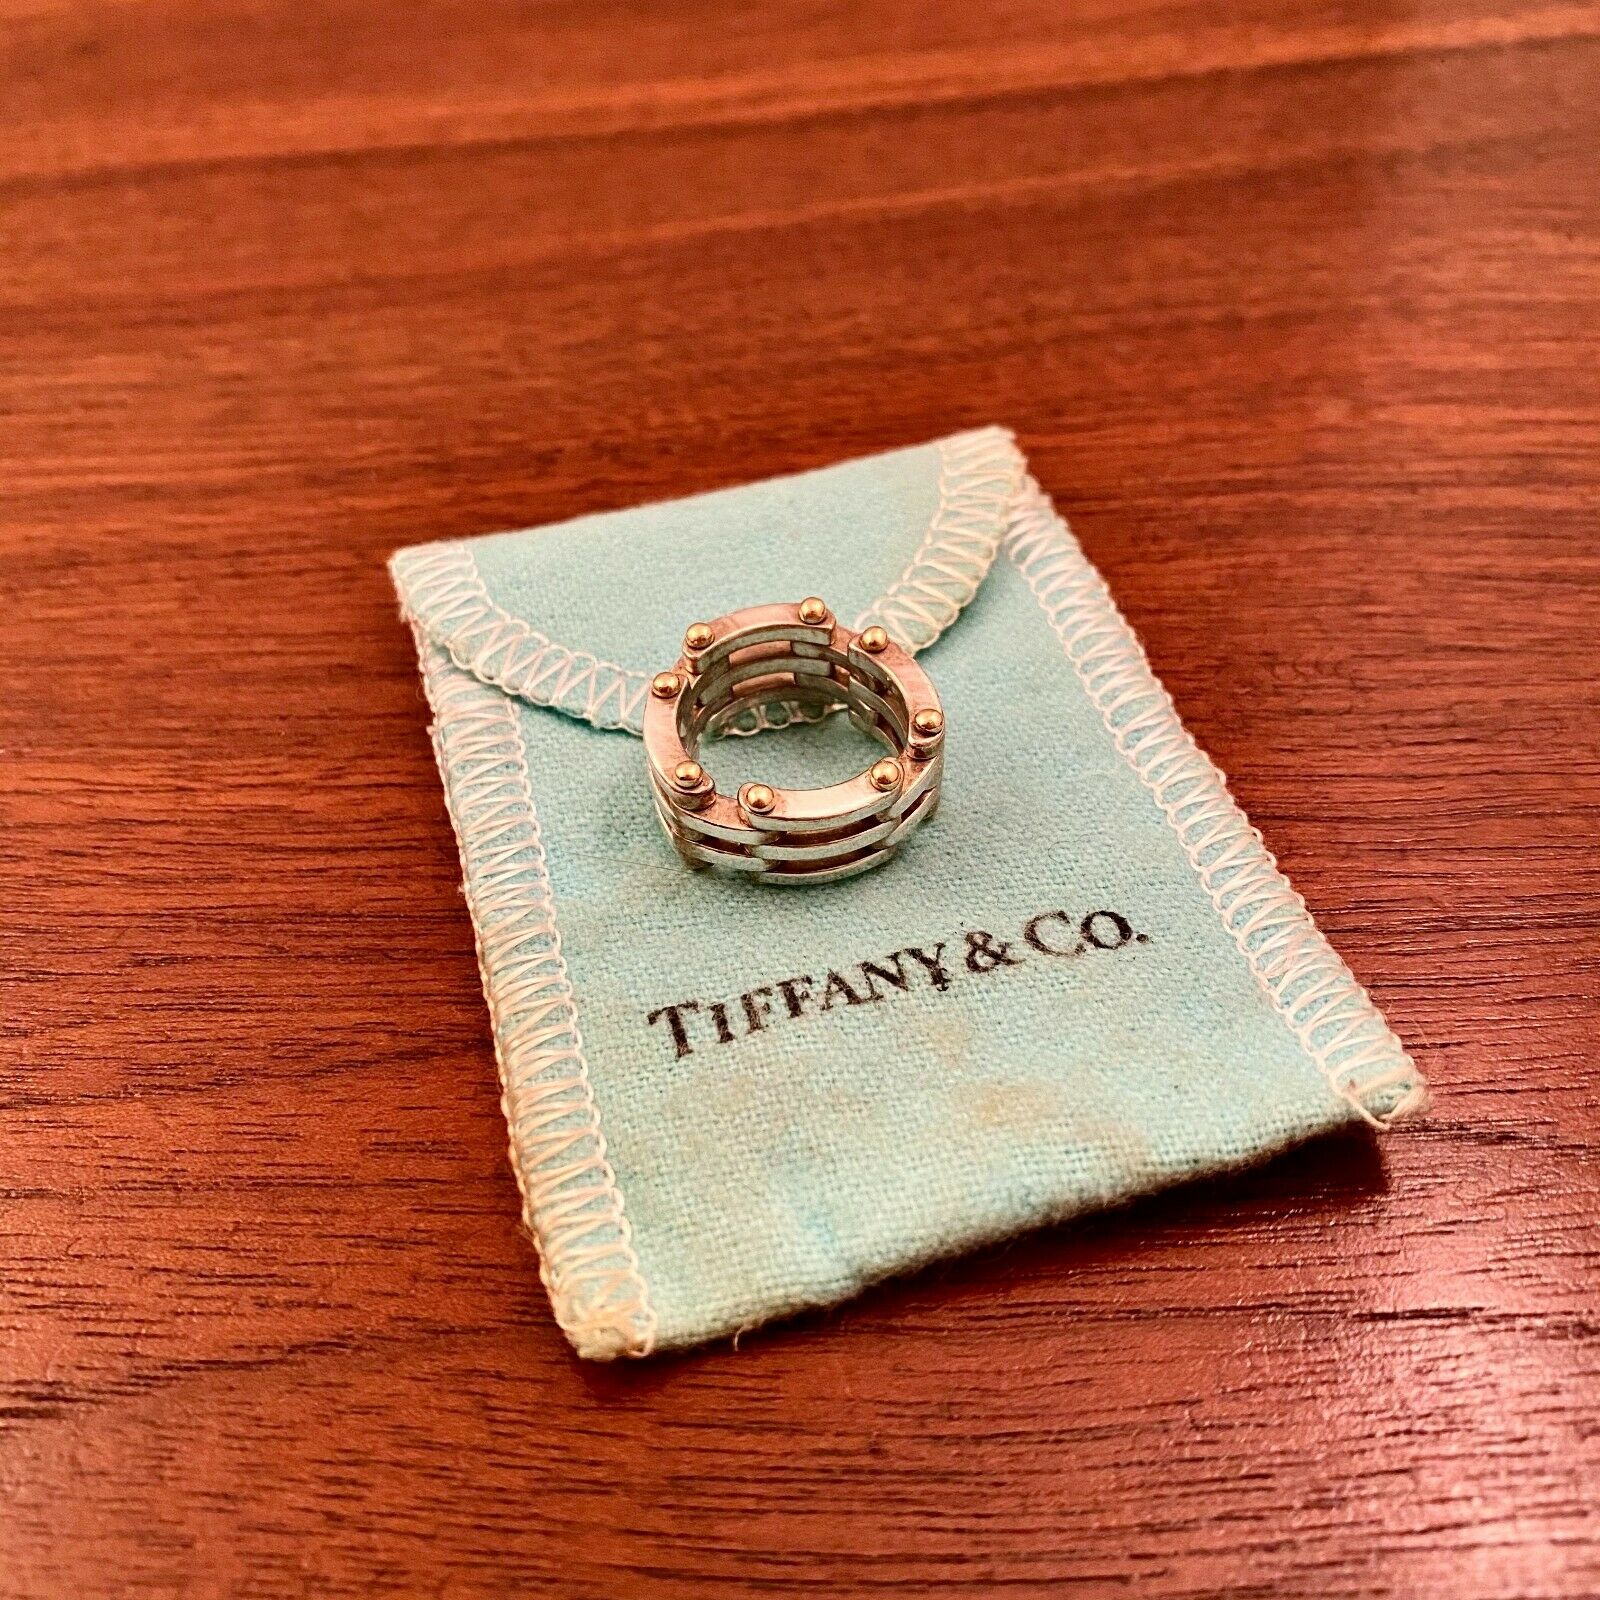 Vintage Tiffany & Co. Sterling Silver & 18k Yellow Gold Gatelink Ring - Size 5.5